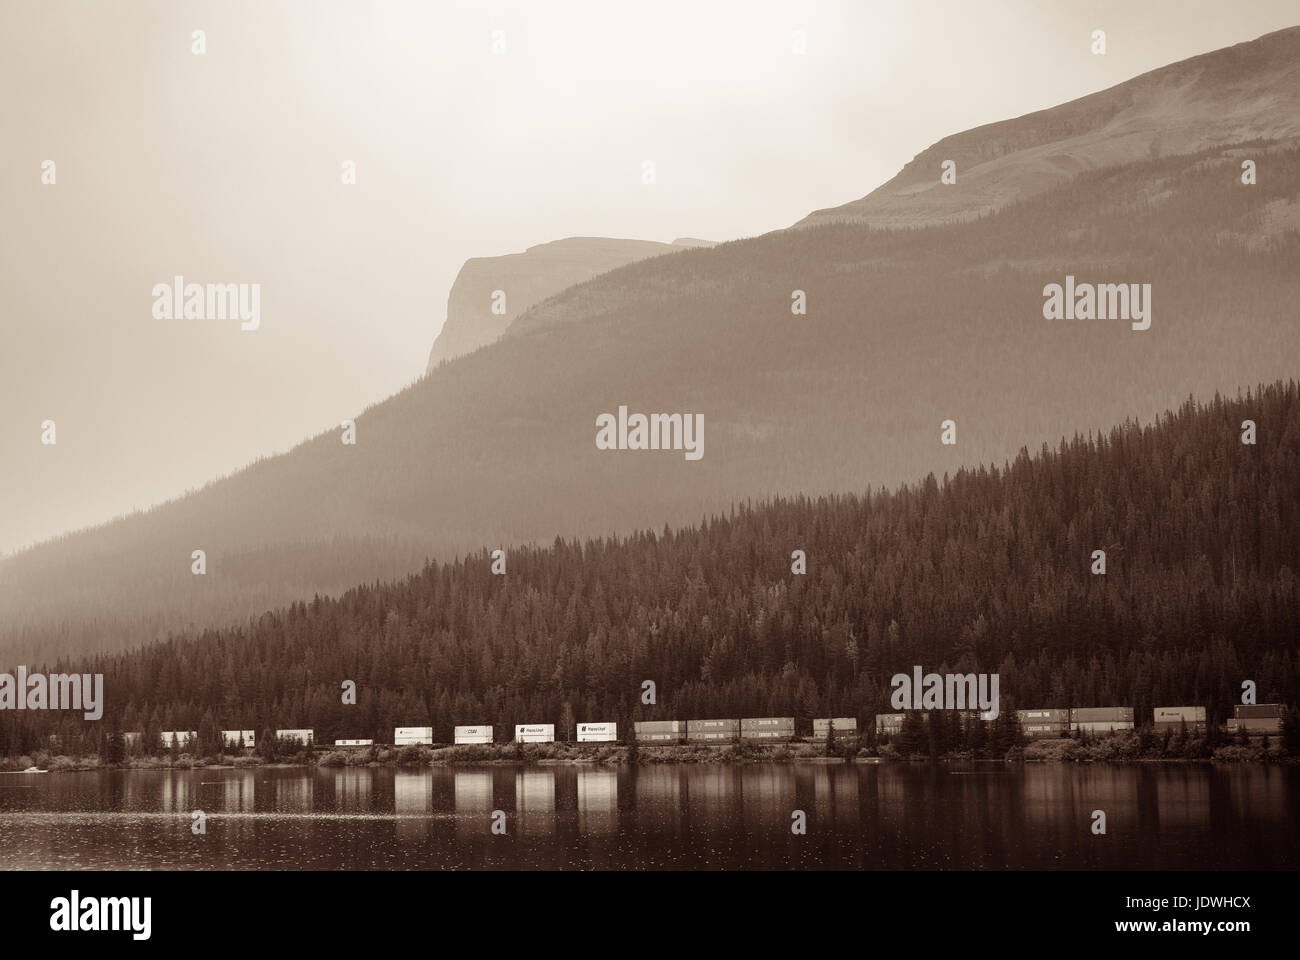 BANFF, CANADA - AUGUST 27: Cargo train lake and mountain on August 27, 2015 in Banff National Park, Canada. Established in 1885, it is the oldest park Stock Photo